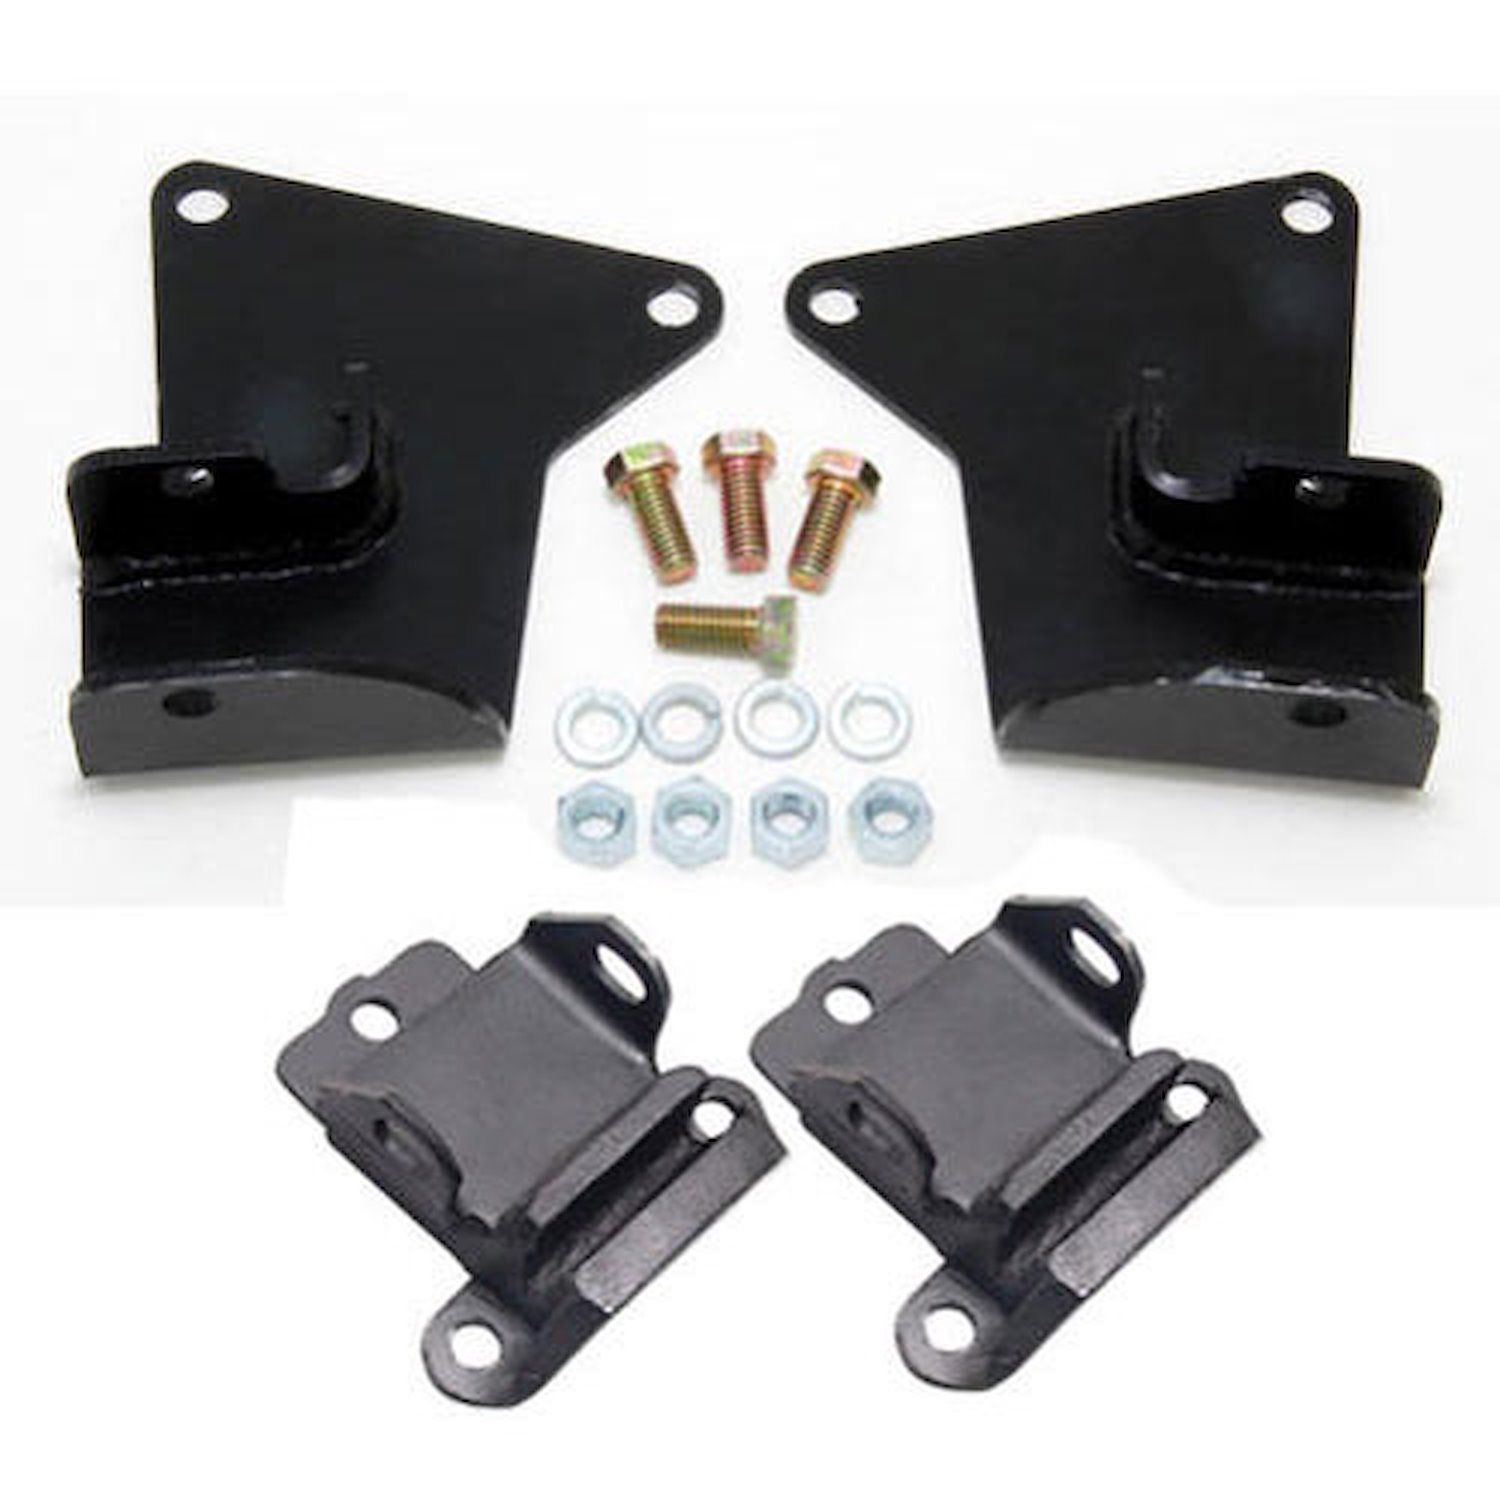 Engine Swap Motor Mount Kit Small Block Chevy/Big Block Chevy V8 into 1964-72 GM A-Body Cars